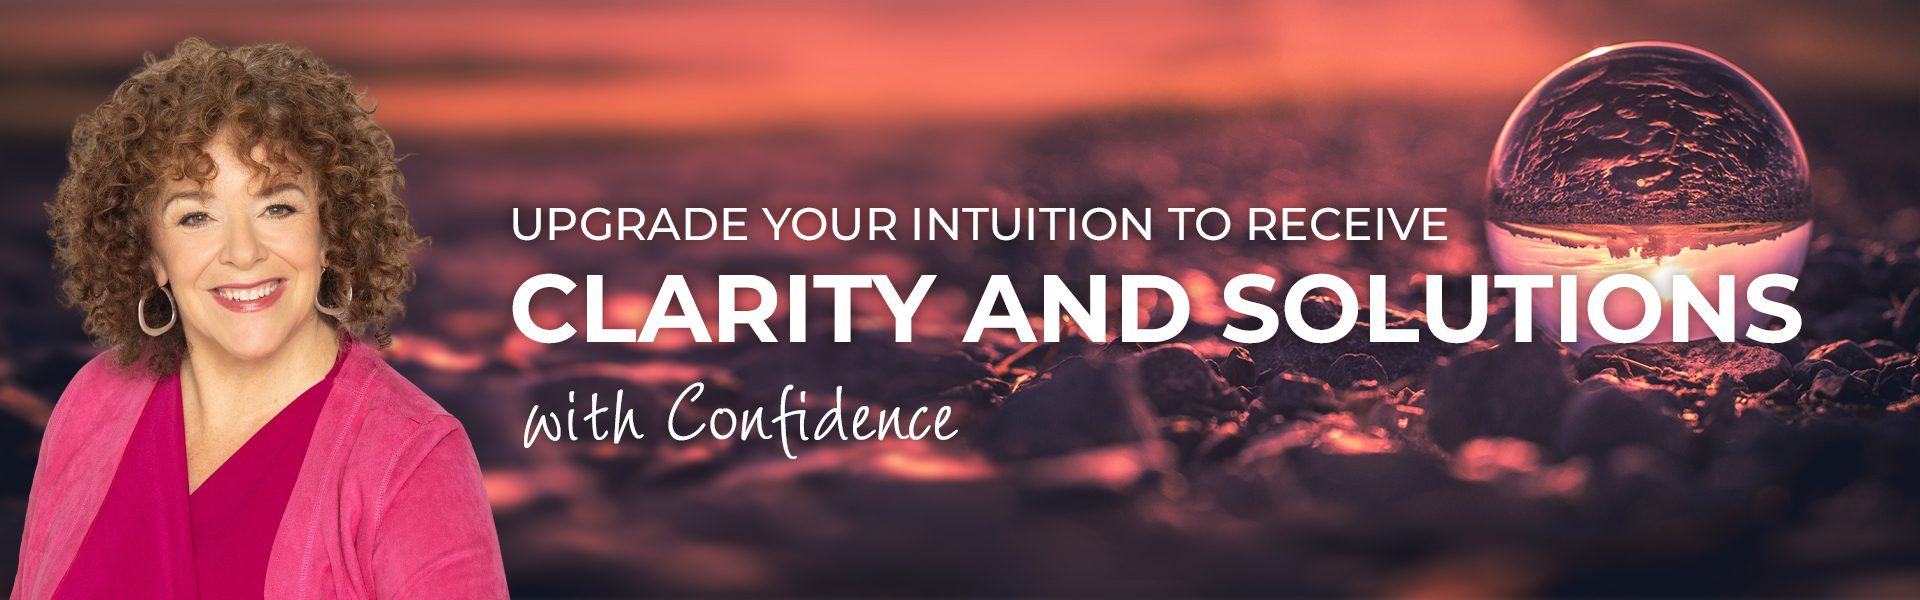 Clarity and Solutions Banner